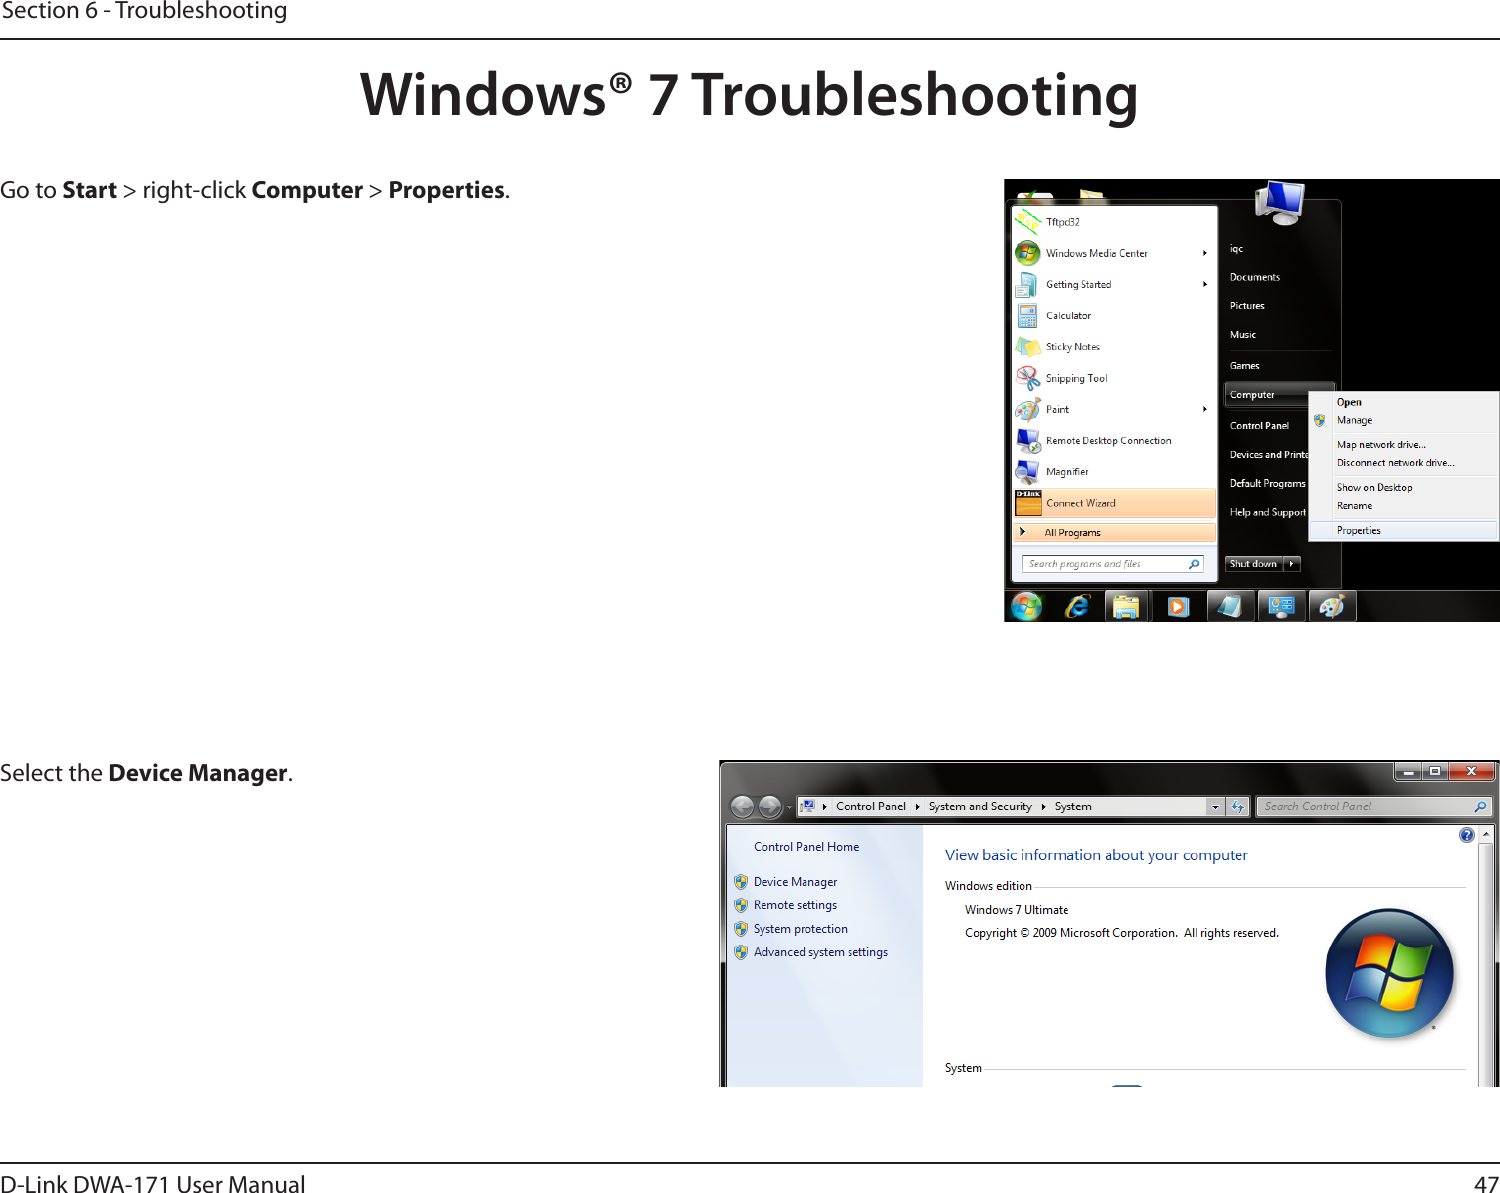 47D-Link DWA-171 User ManualSection 6 - TroubleshootingWindows® 7 TroubleshootingGo to Start &gt; right-click Computer &gt; Properties.Select the Device Manager.